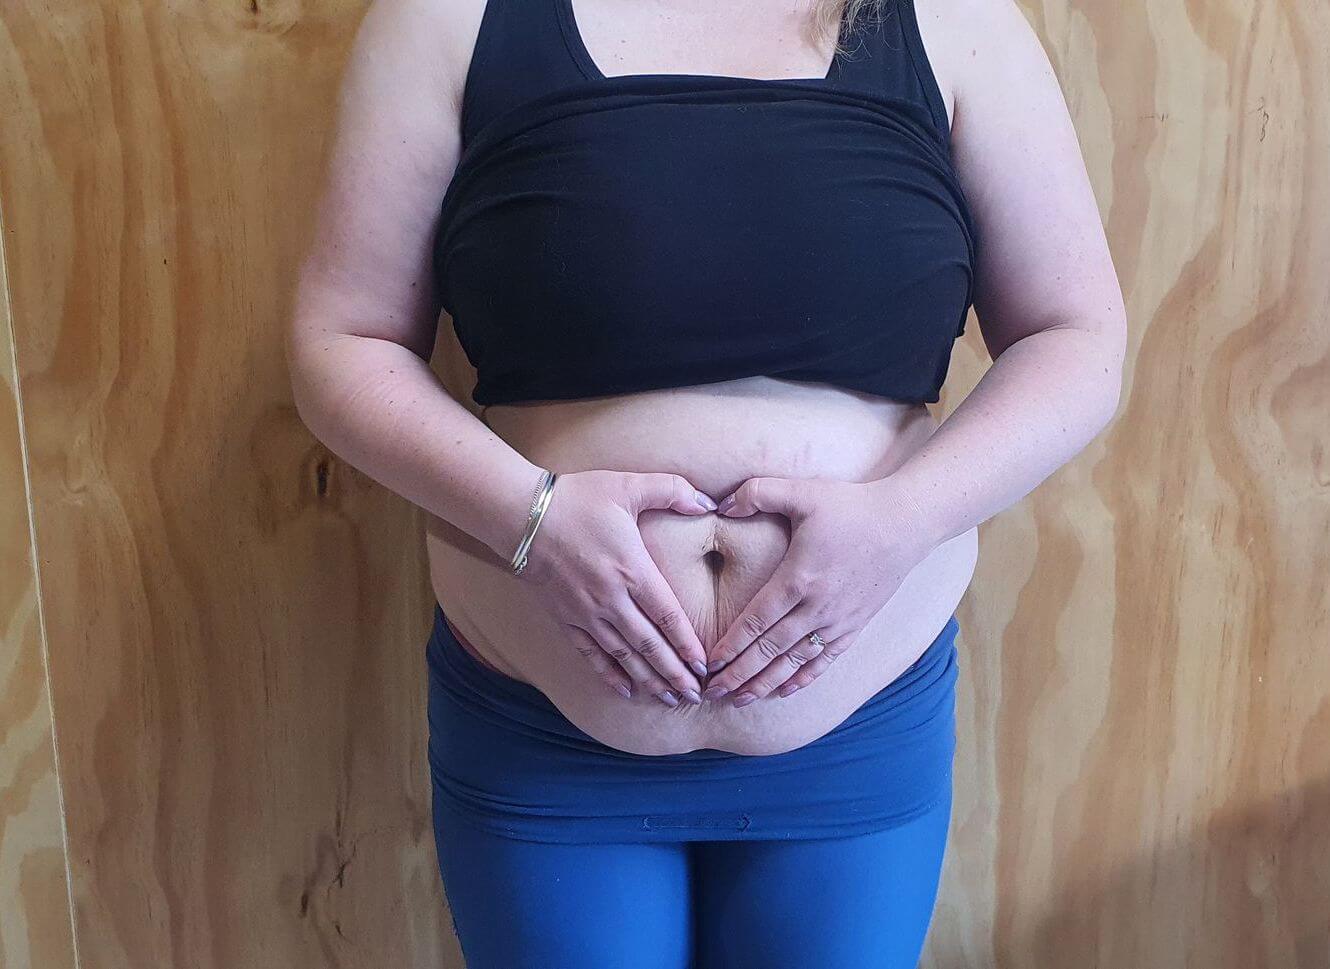 Post-baby body: what if I never look the same again?